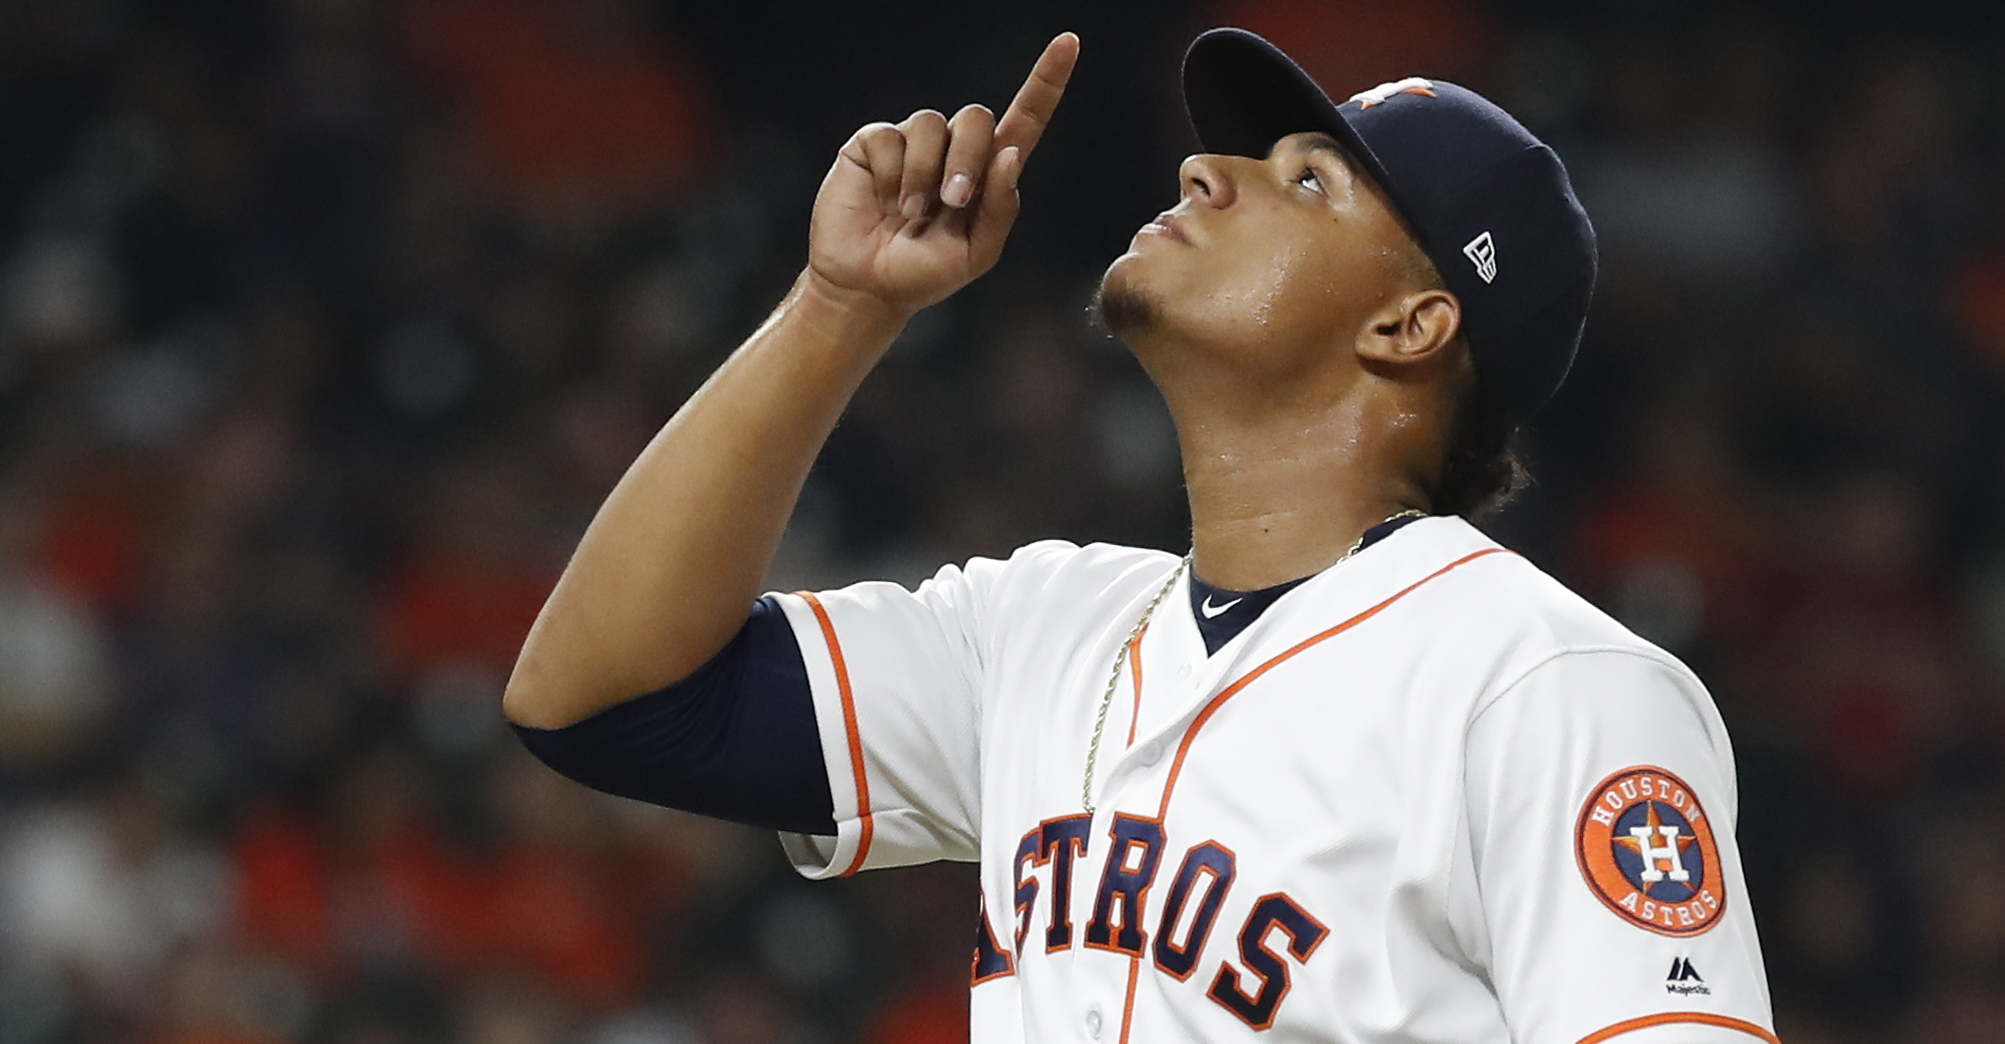 Bryan Abreu is emerging as the Astros' breakout star of 2023